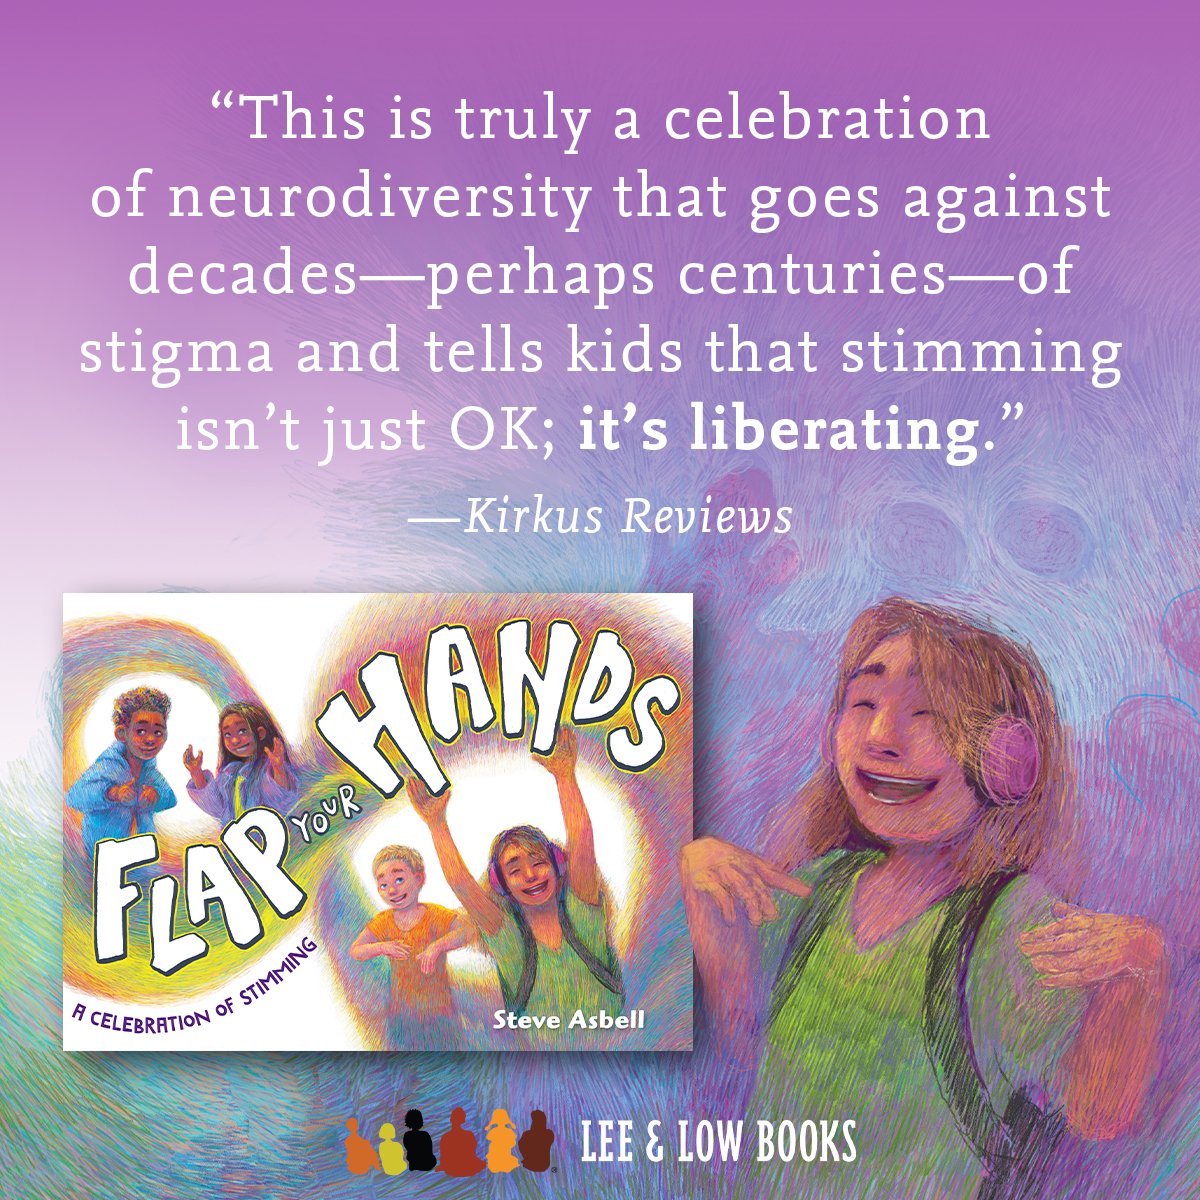 🎉Happy #BookBirthday to Flap Your Hands: A Celebration of Stimming by Steve Asbell! ✨We're so excited to share this groundbreaking picture book debut that celebrates and normalizes stimming! 📚Flap Your Hands is available now! Learn more: bit.ly/3PXSc0Q